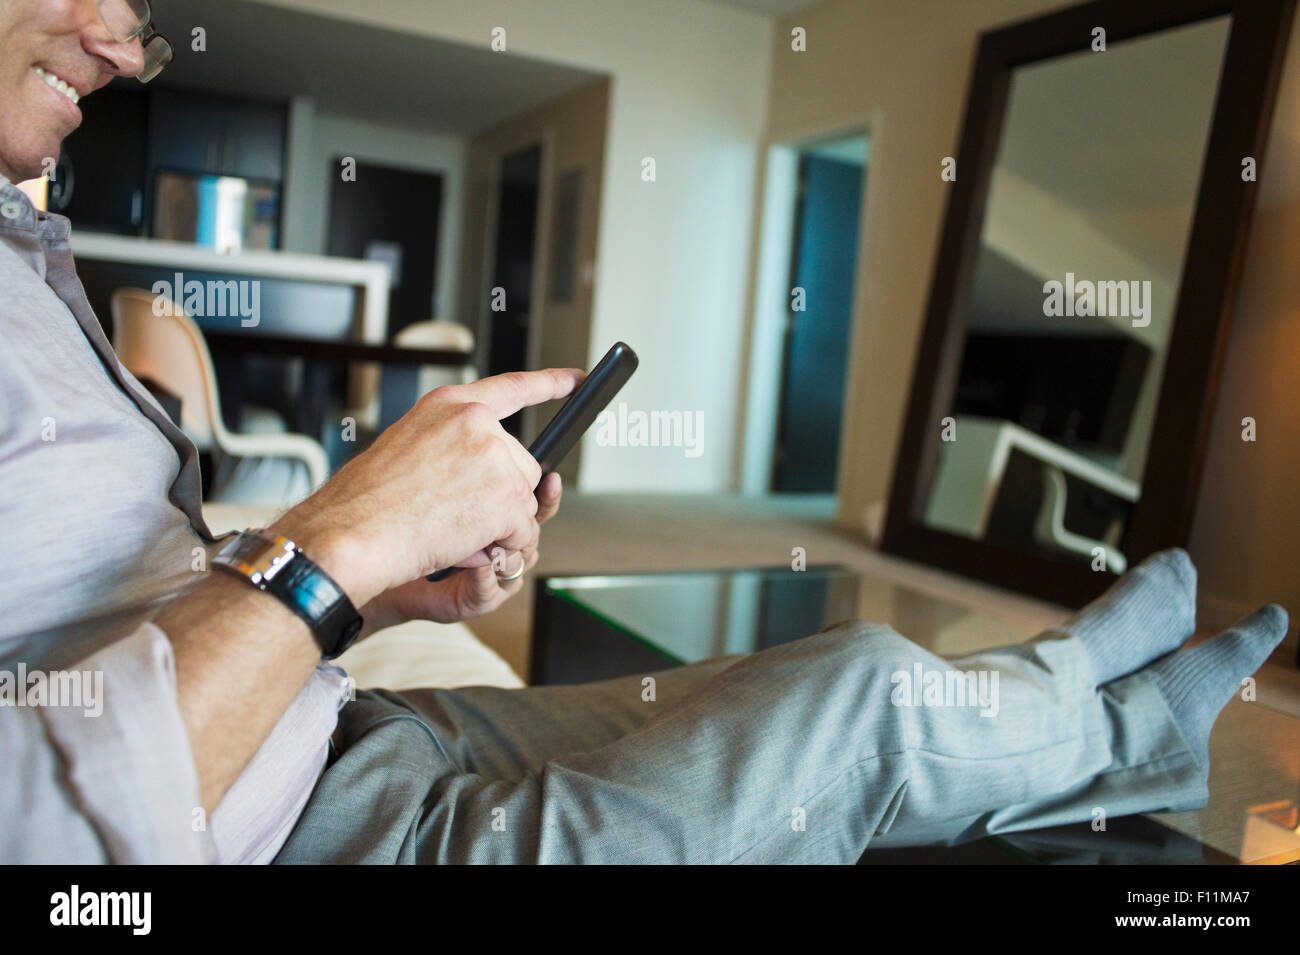 Caucasian businessman using cell phone in hotel room Stock Photo